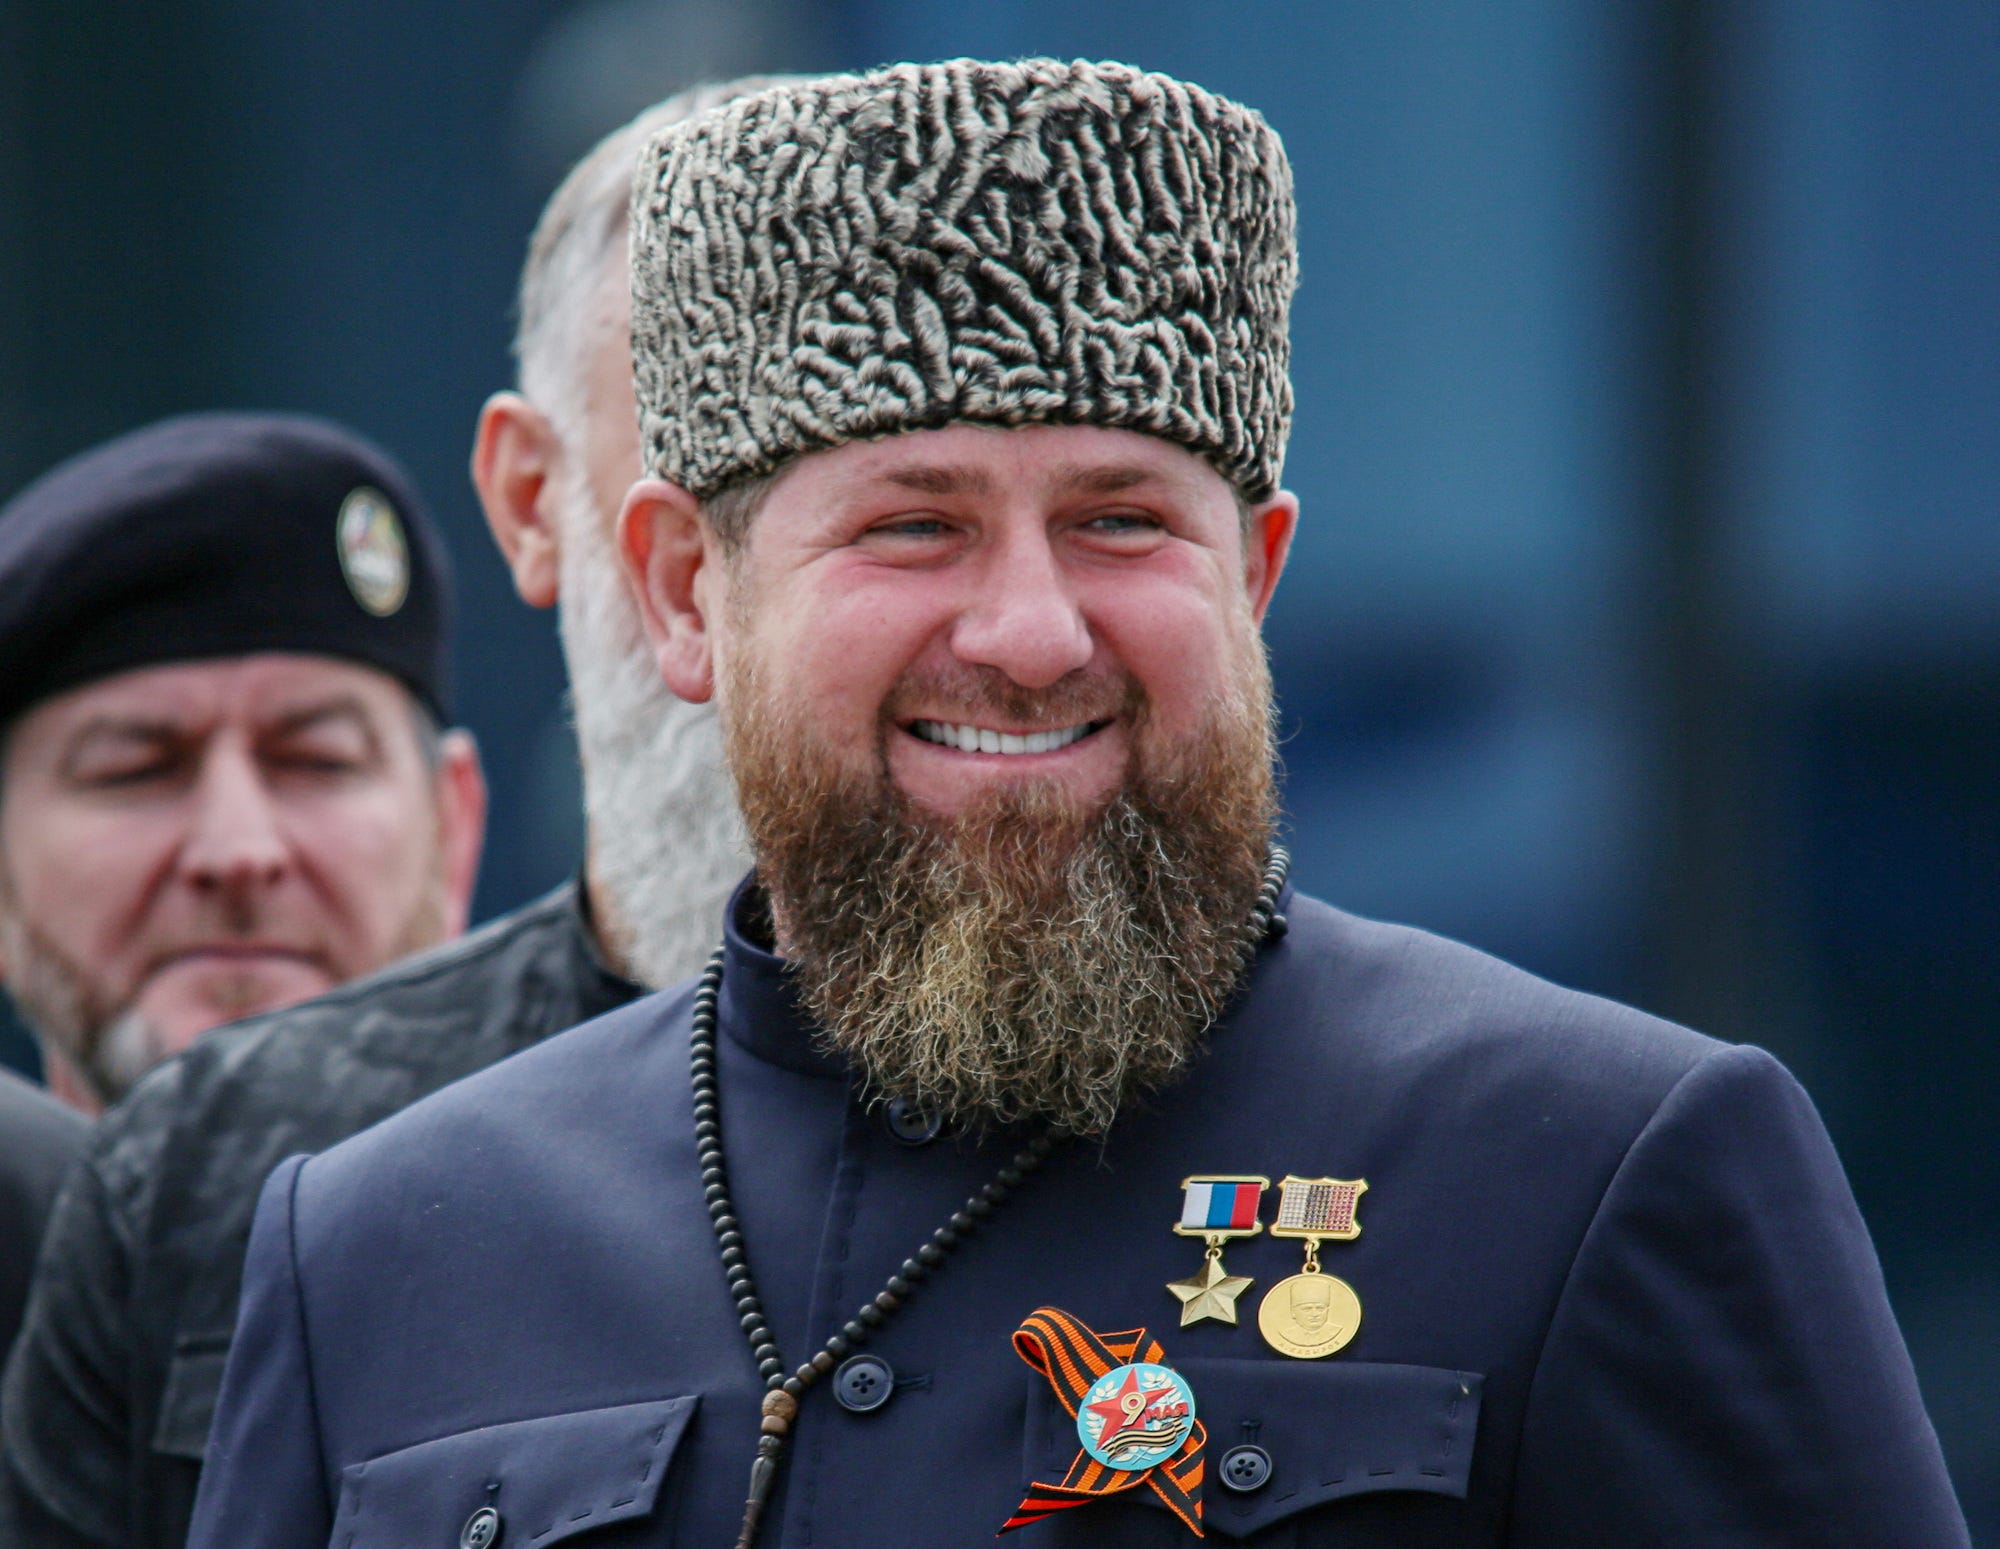 Head of the Chechen Republic Ramzan Kadyrov attends a military parade in the Chechen capital Grozny, Russia, in May 2022.